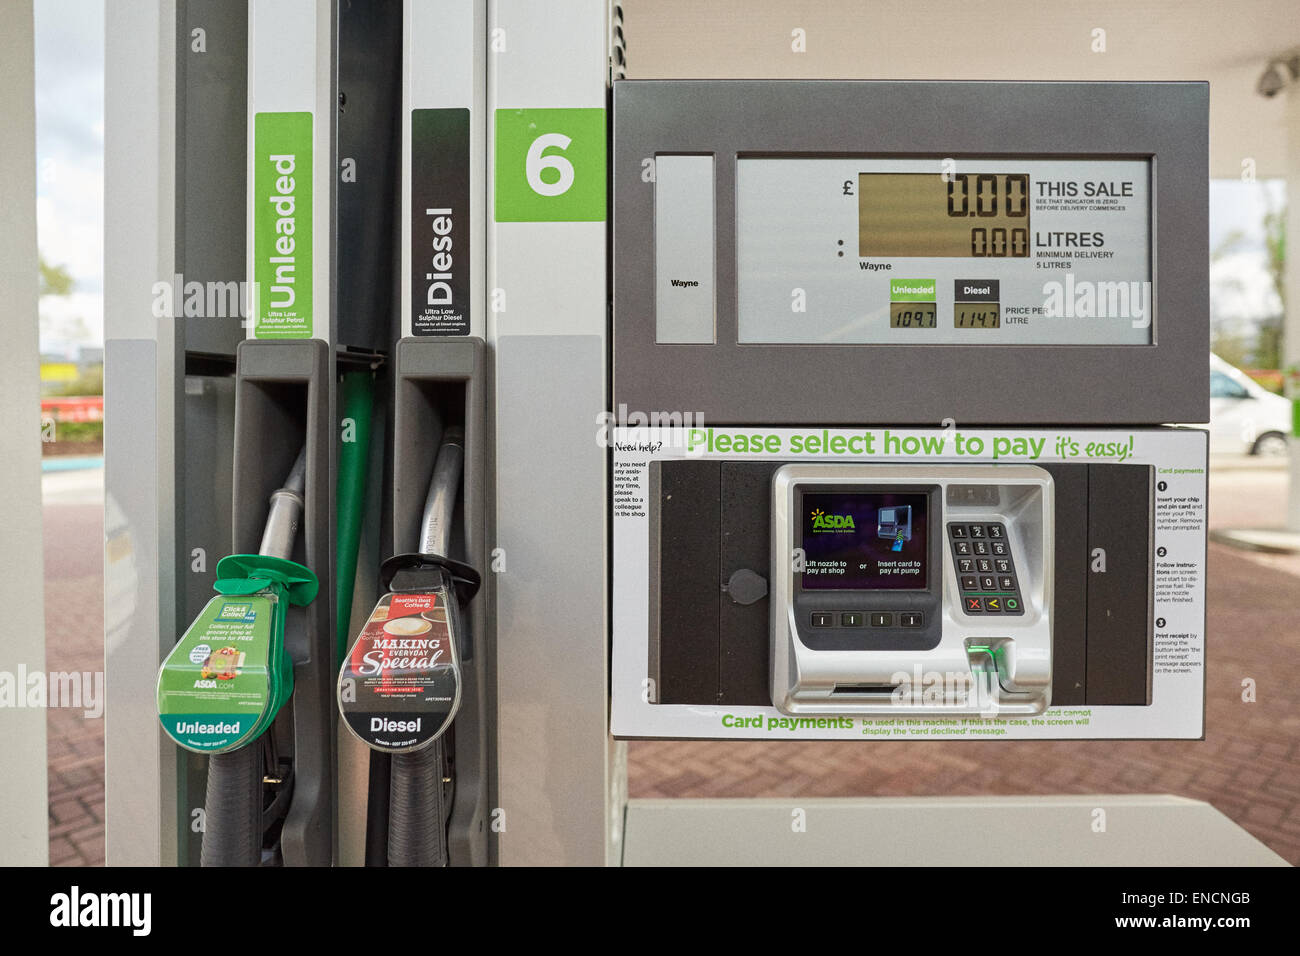 Asda petrol fuel pump selling unleaded and diesel with card reader payment Stock Photo